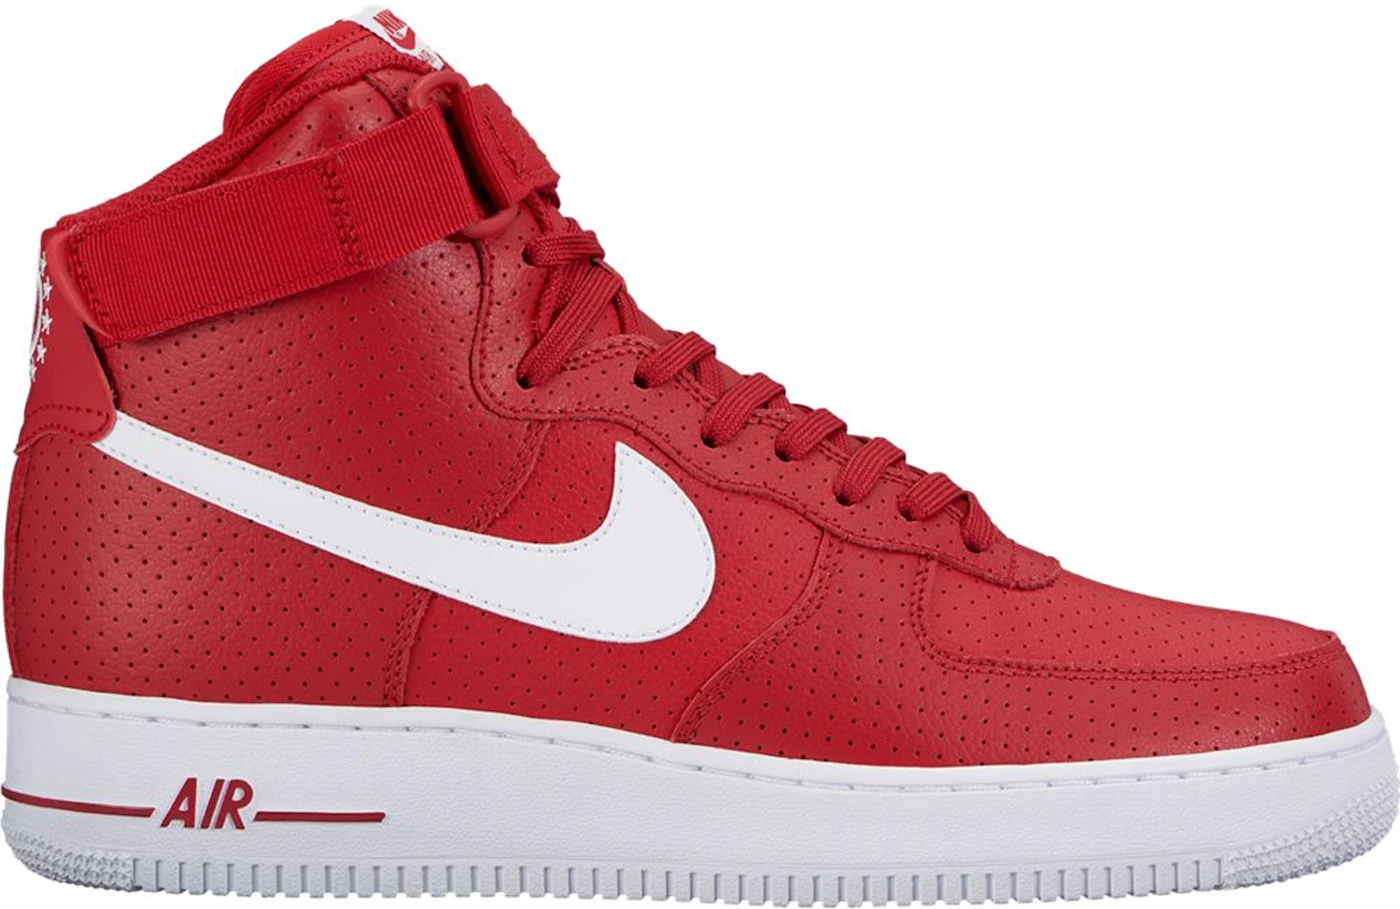 Nike Air Force 1 High Gym Red Perforated 315121-606, SneakerNews.com